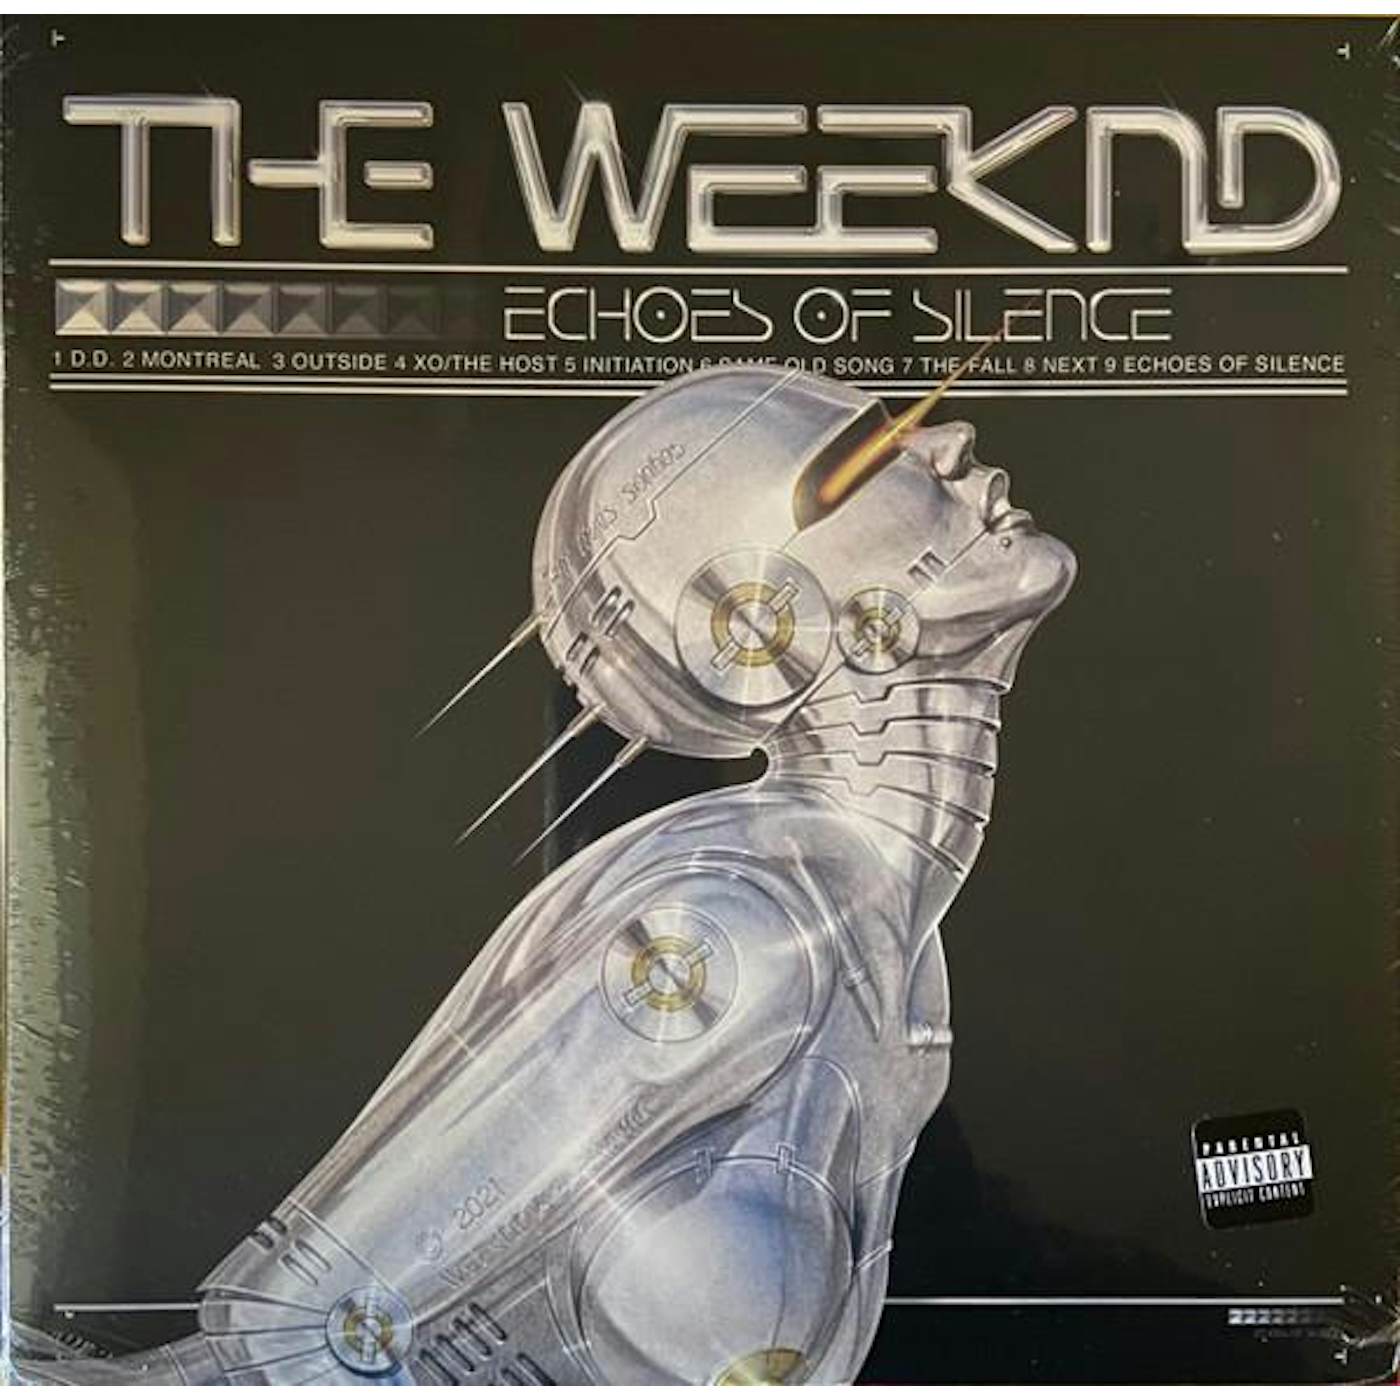 The Weeknd ECHOES OF SILENCE Vinyl Record